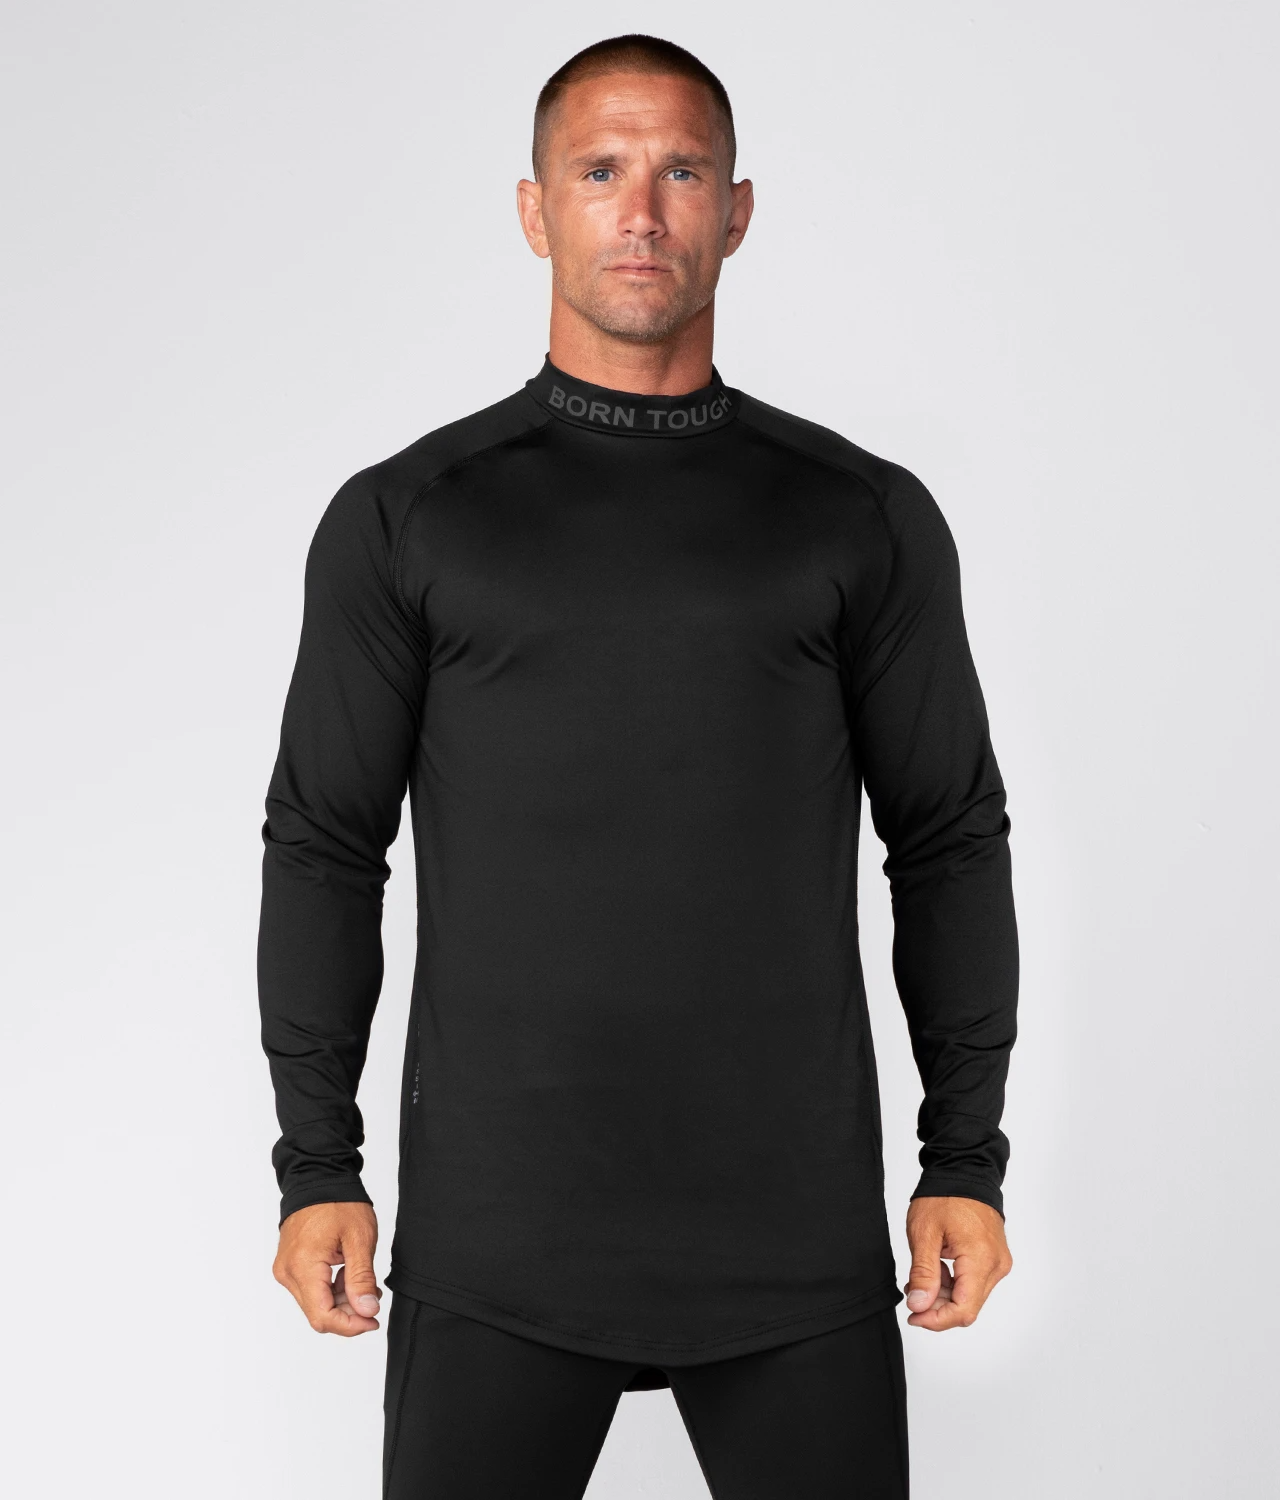 What is a Compression Shirt? » BodyweightHeaven